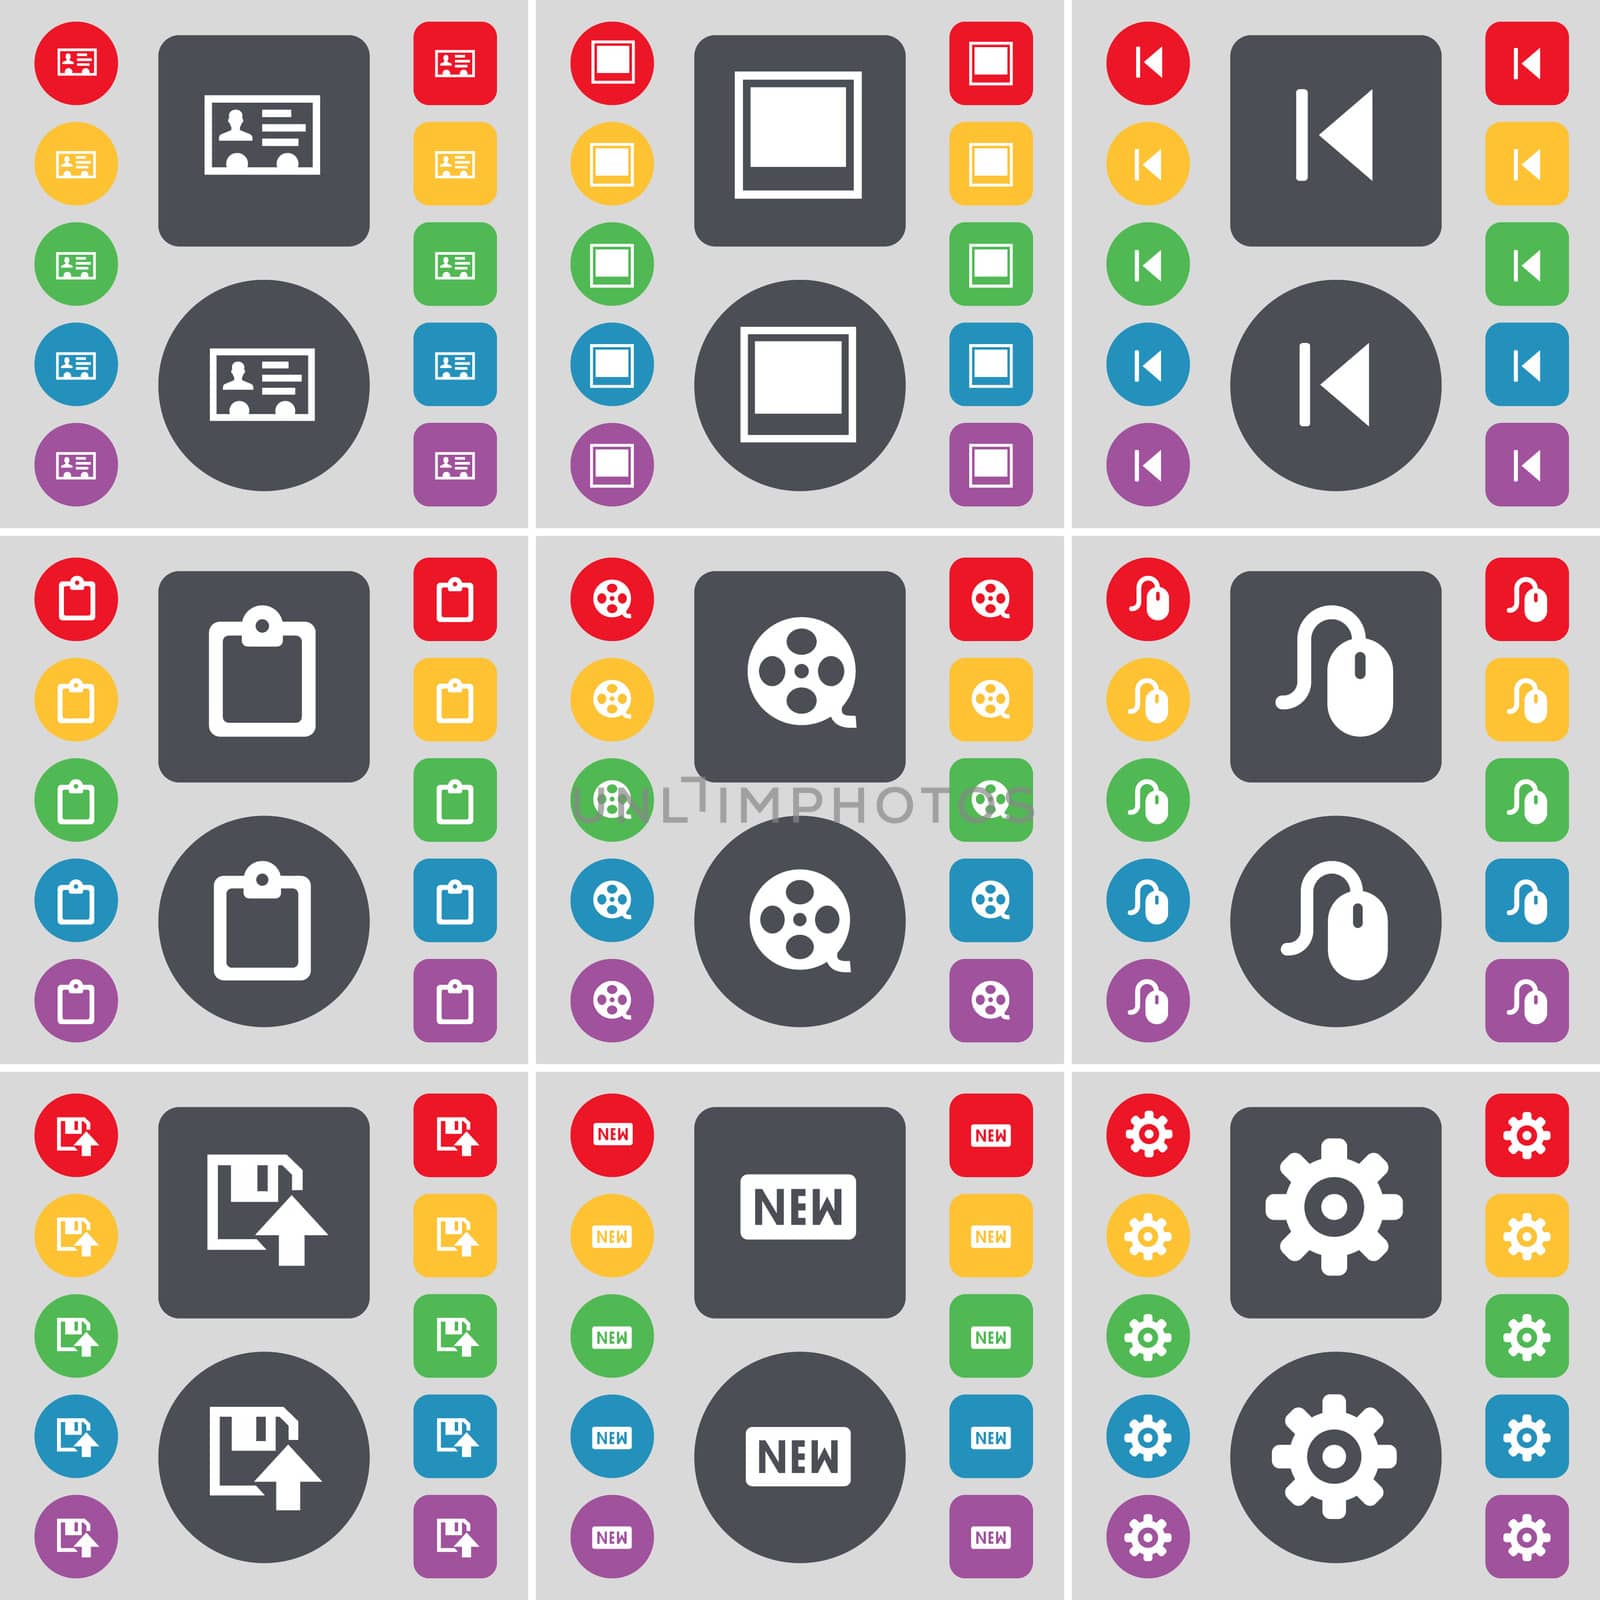 Contact, Window, Media skip, Survey, Videotape, Mouse, Floppy, New, Gear icon symbol. A large set of flat, colored buttons for your design. illustration